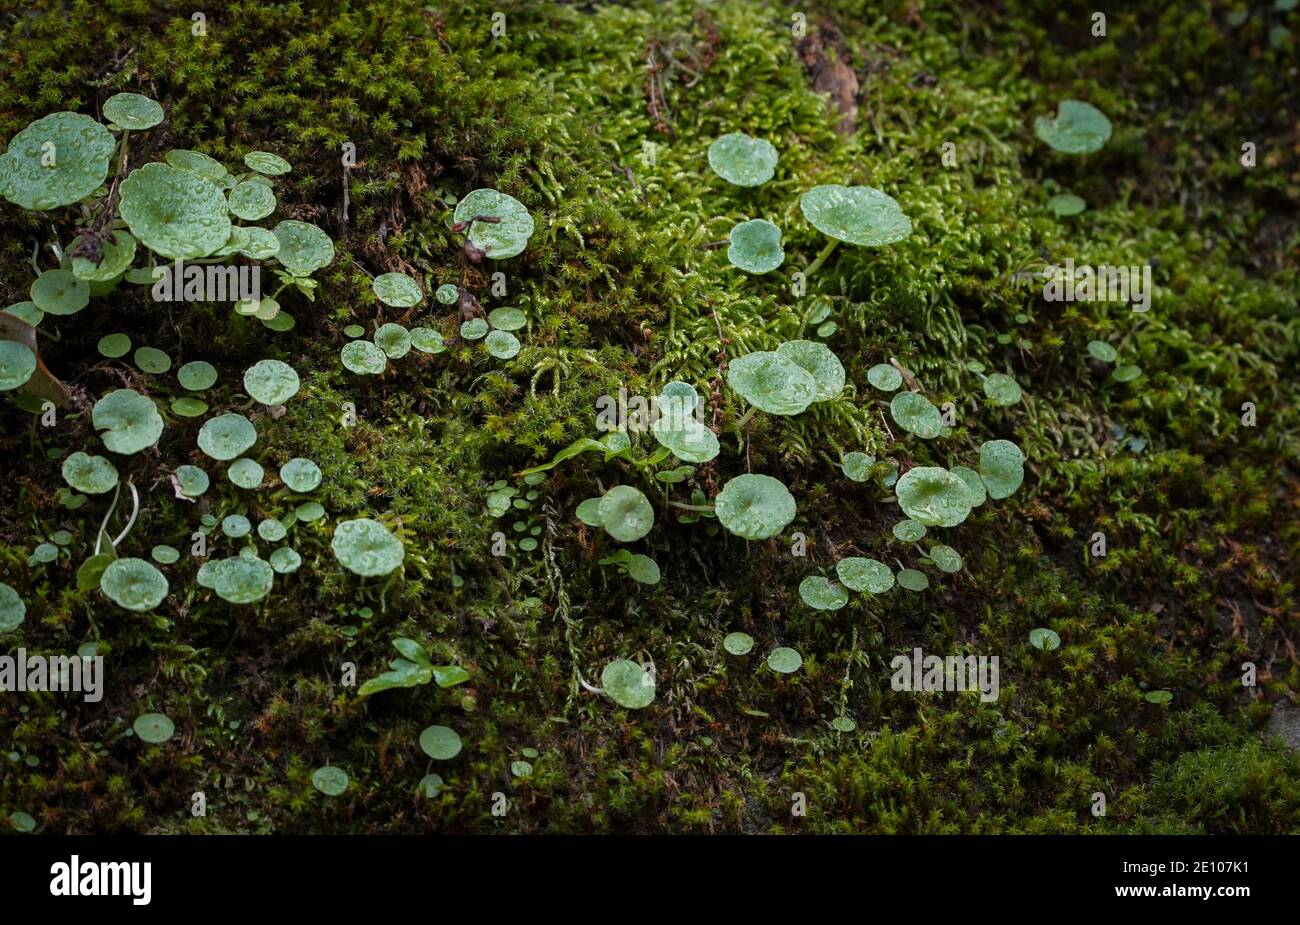 Umbilicus rupestris, navelwort, penny-pies, wall pennywort, growing on a rock, Andalusia, Spain. Stock Photo